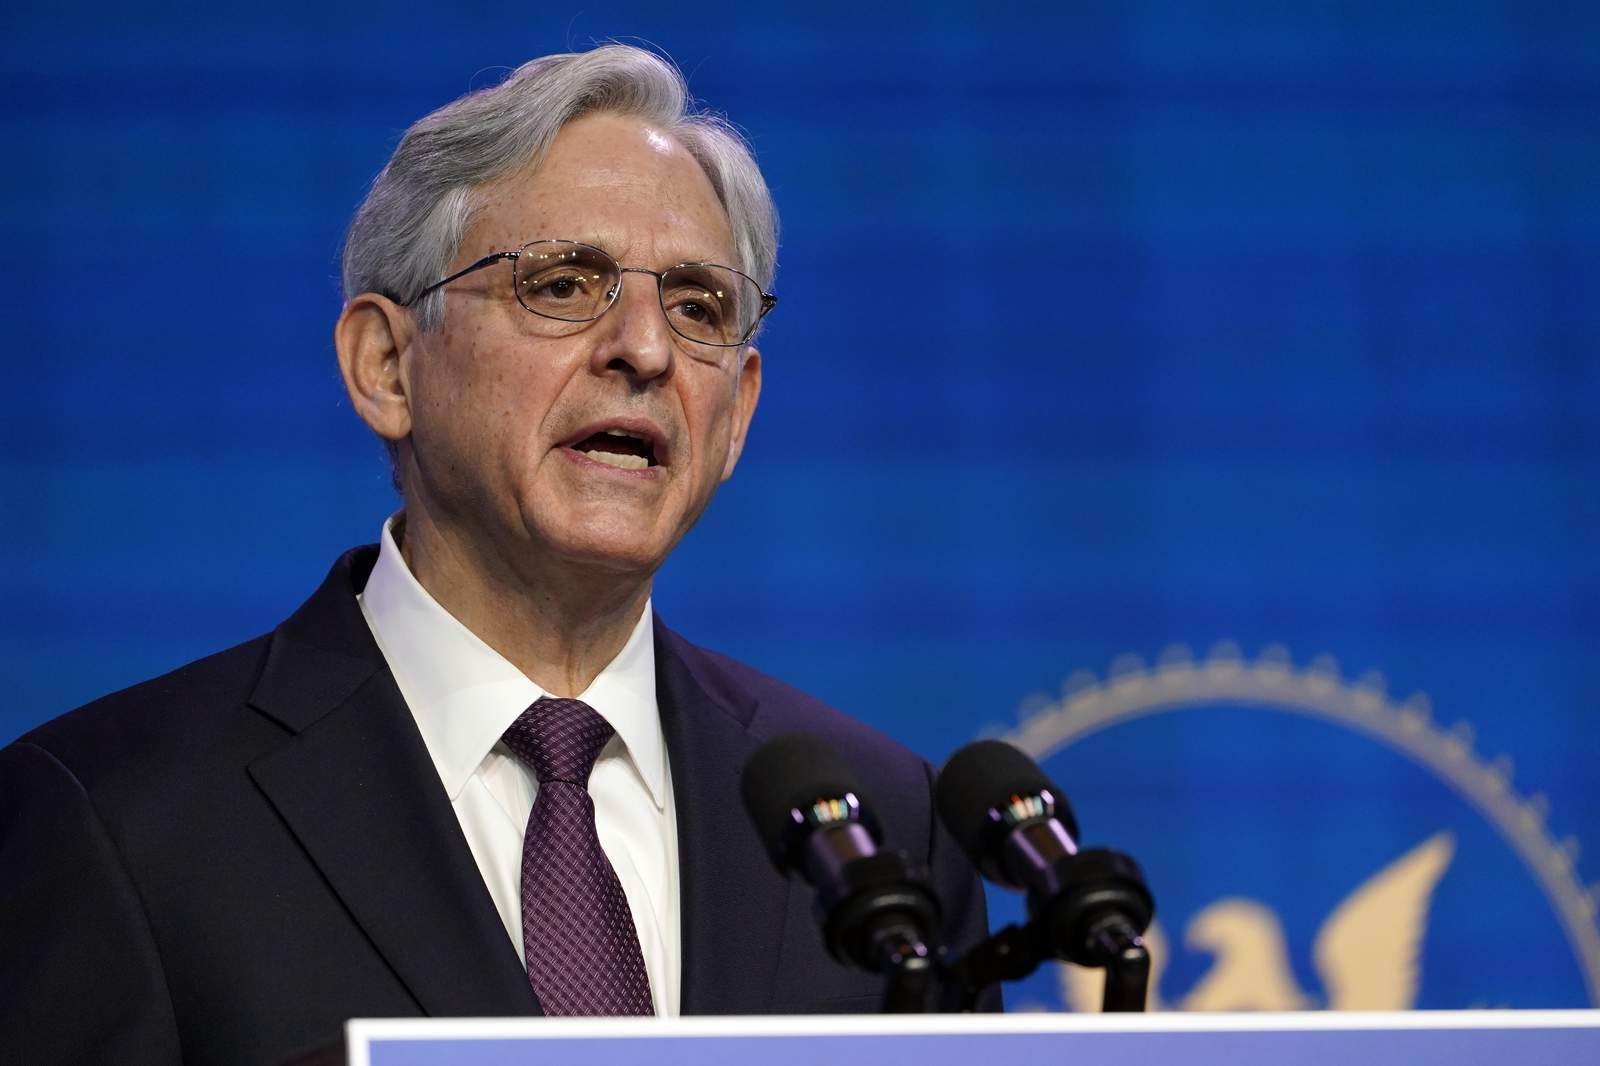 Snubbed as Obama high court pick, Garland in line to be AG